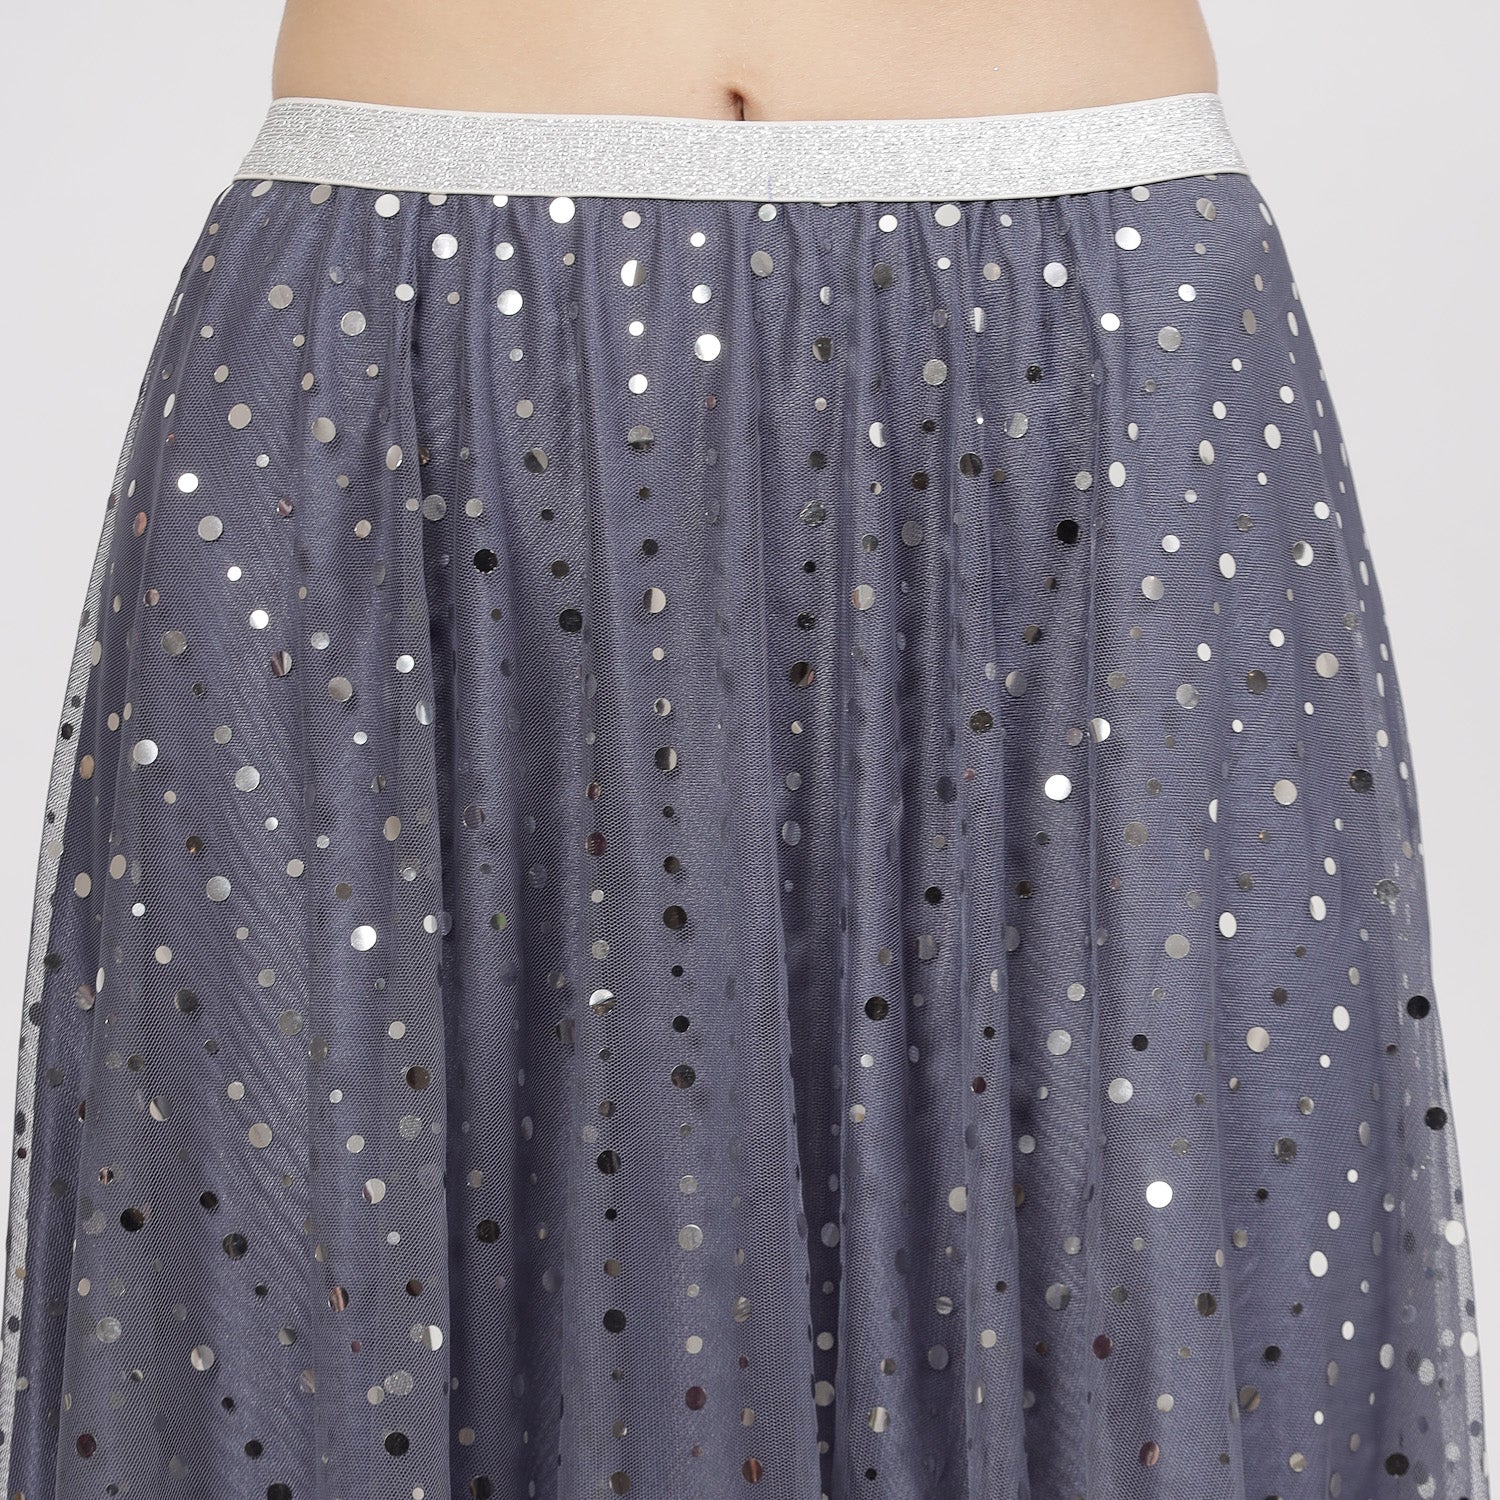 Stone Blue Net Asymmetrical Skirt With Sequins And Lace